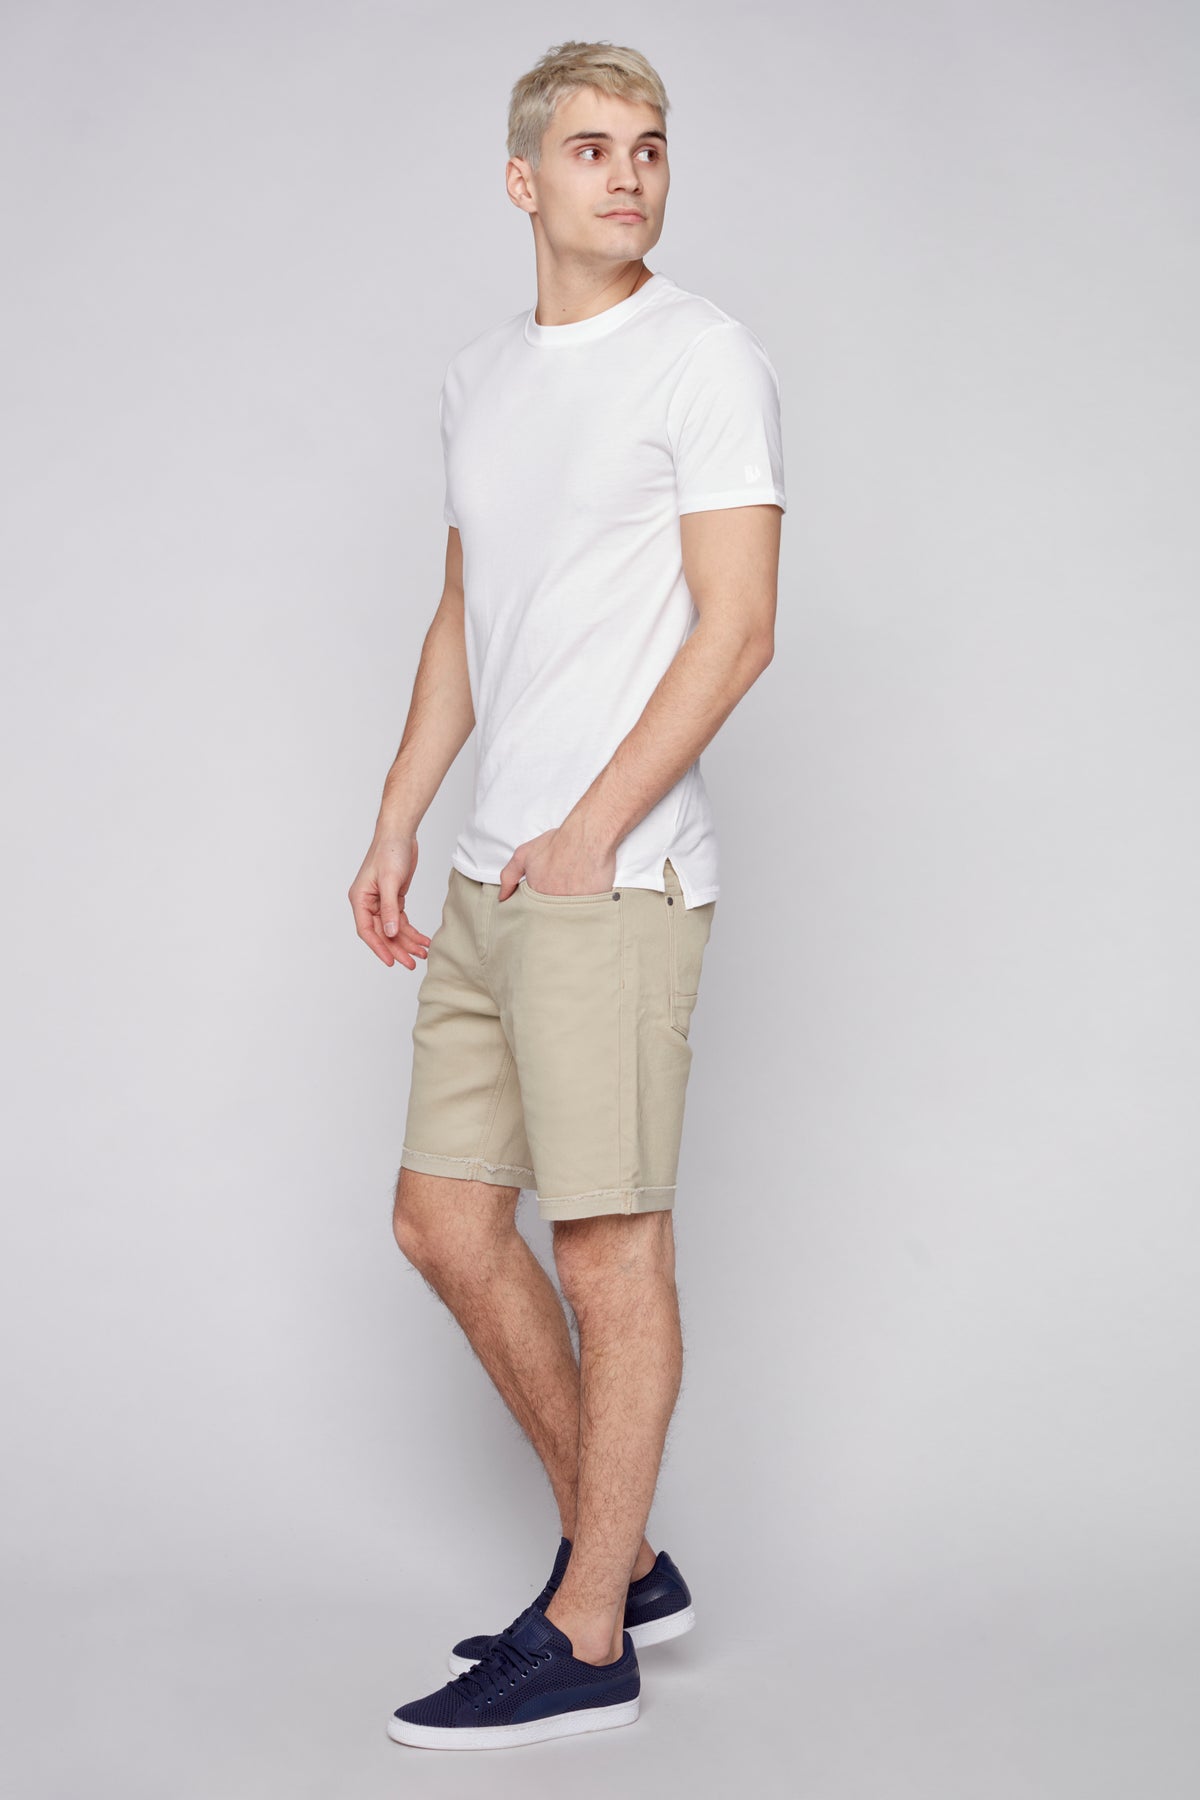 LENNON - Mens Rolled Up Shorts - Tan